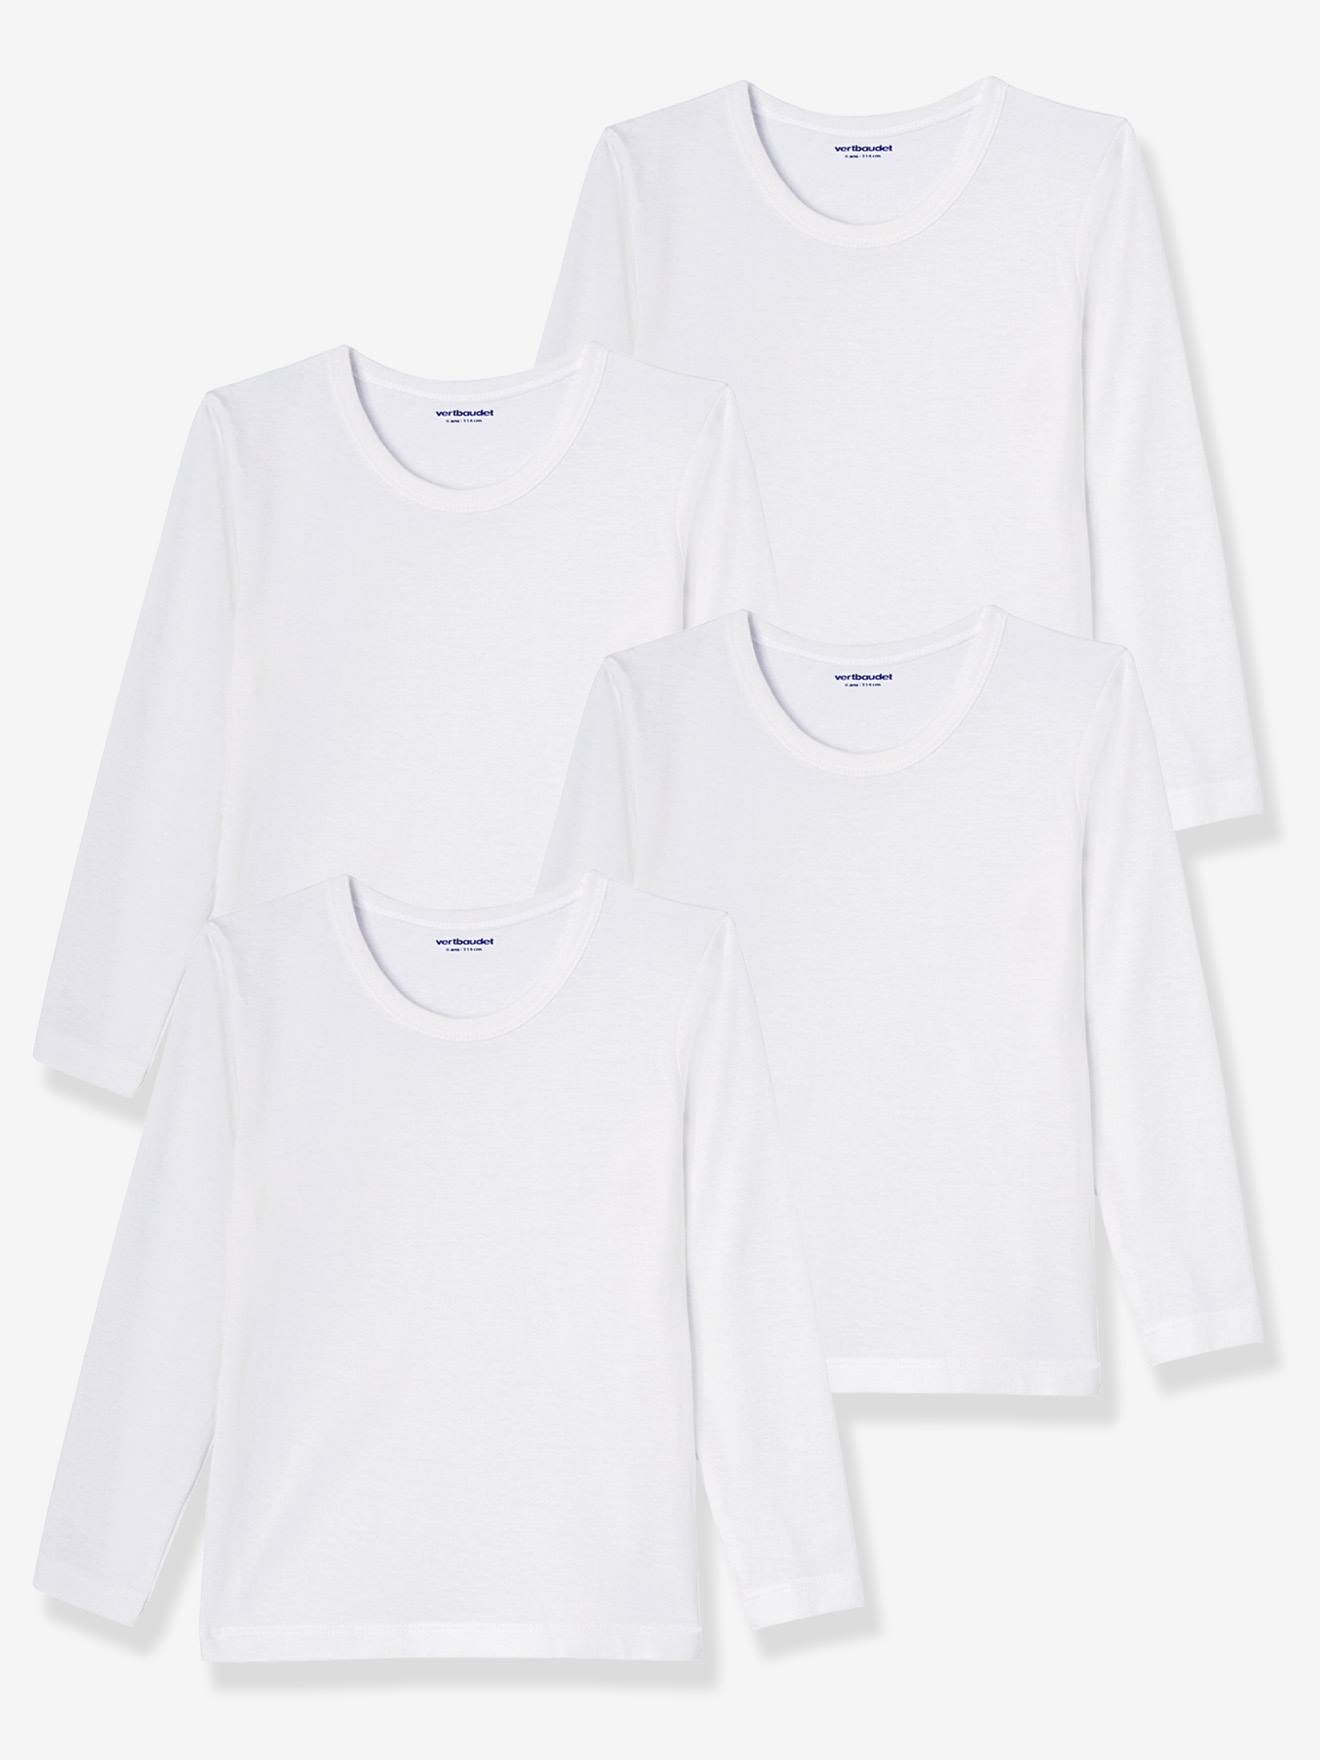 Pack of 4 Boys' T-Shirts - white